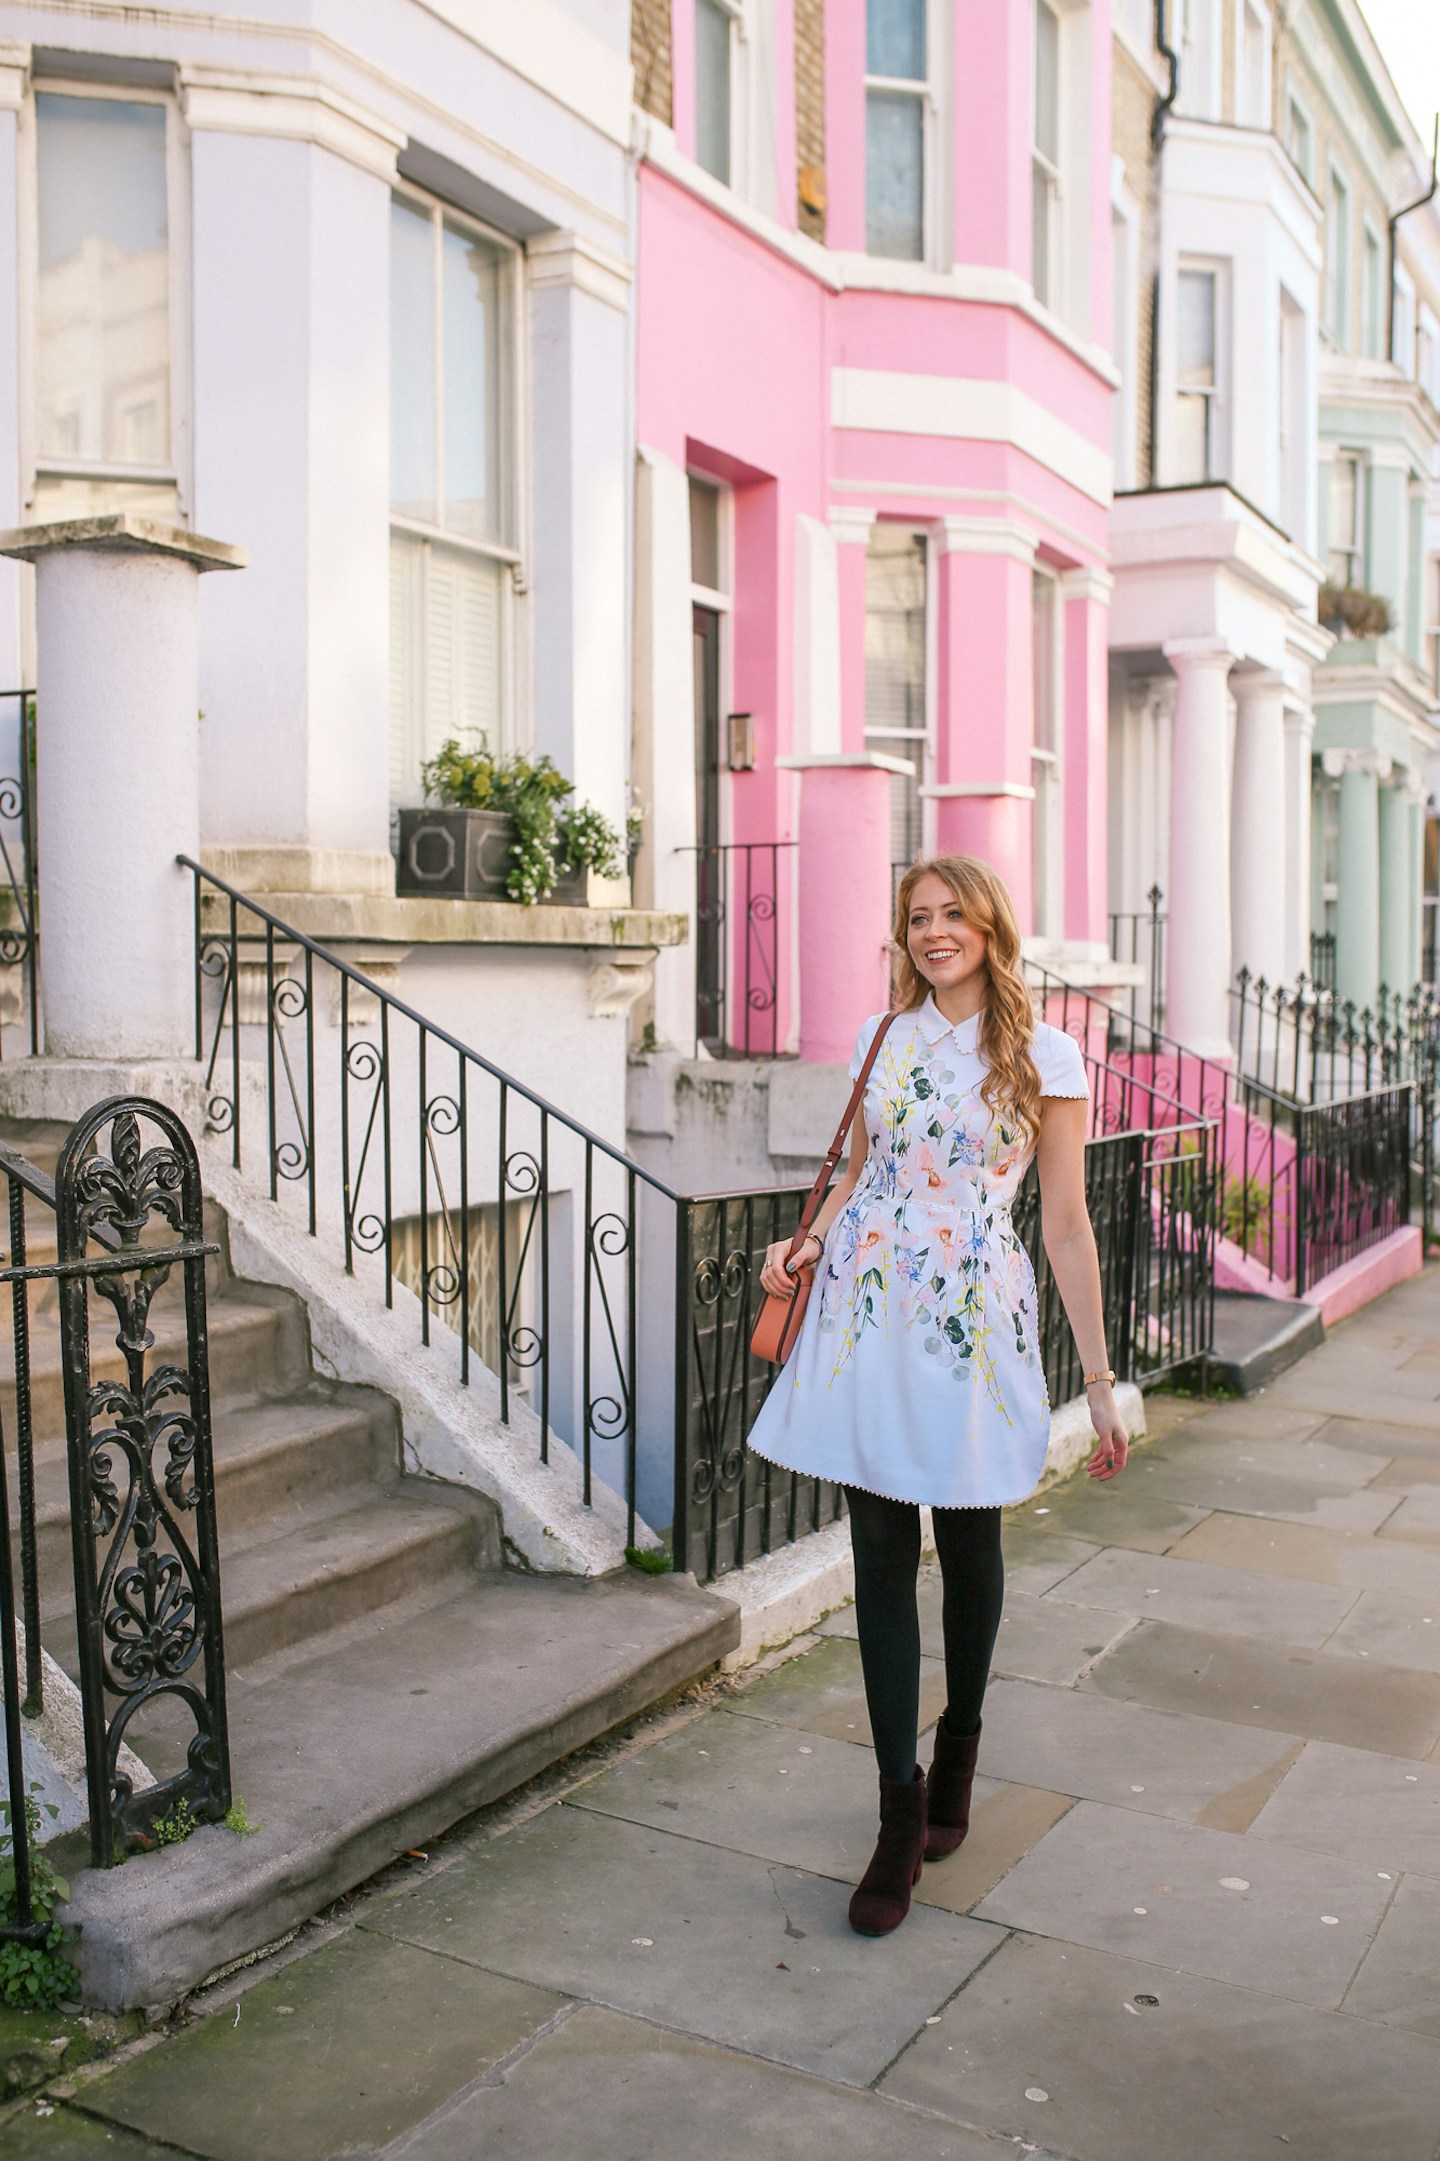 Top 10 Things to do in Notting Hill - from colourful houses to flea markets to charming pubs, discover my favourite London Neighbourhood with me!